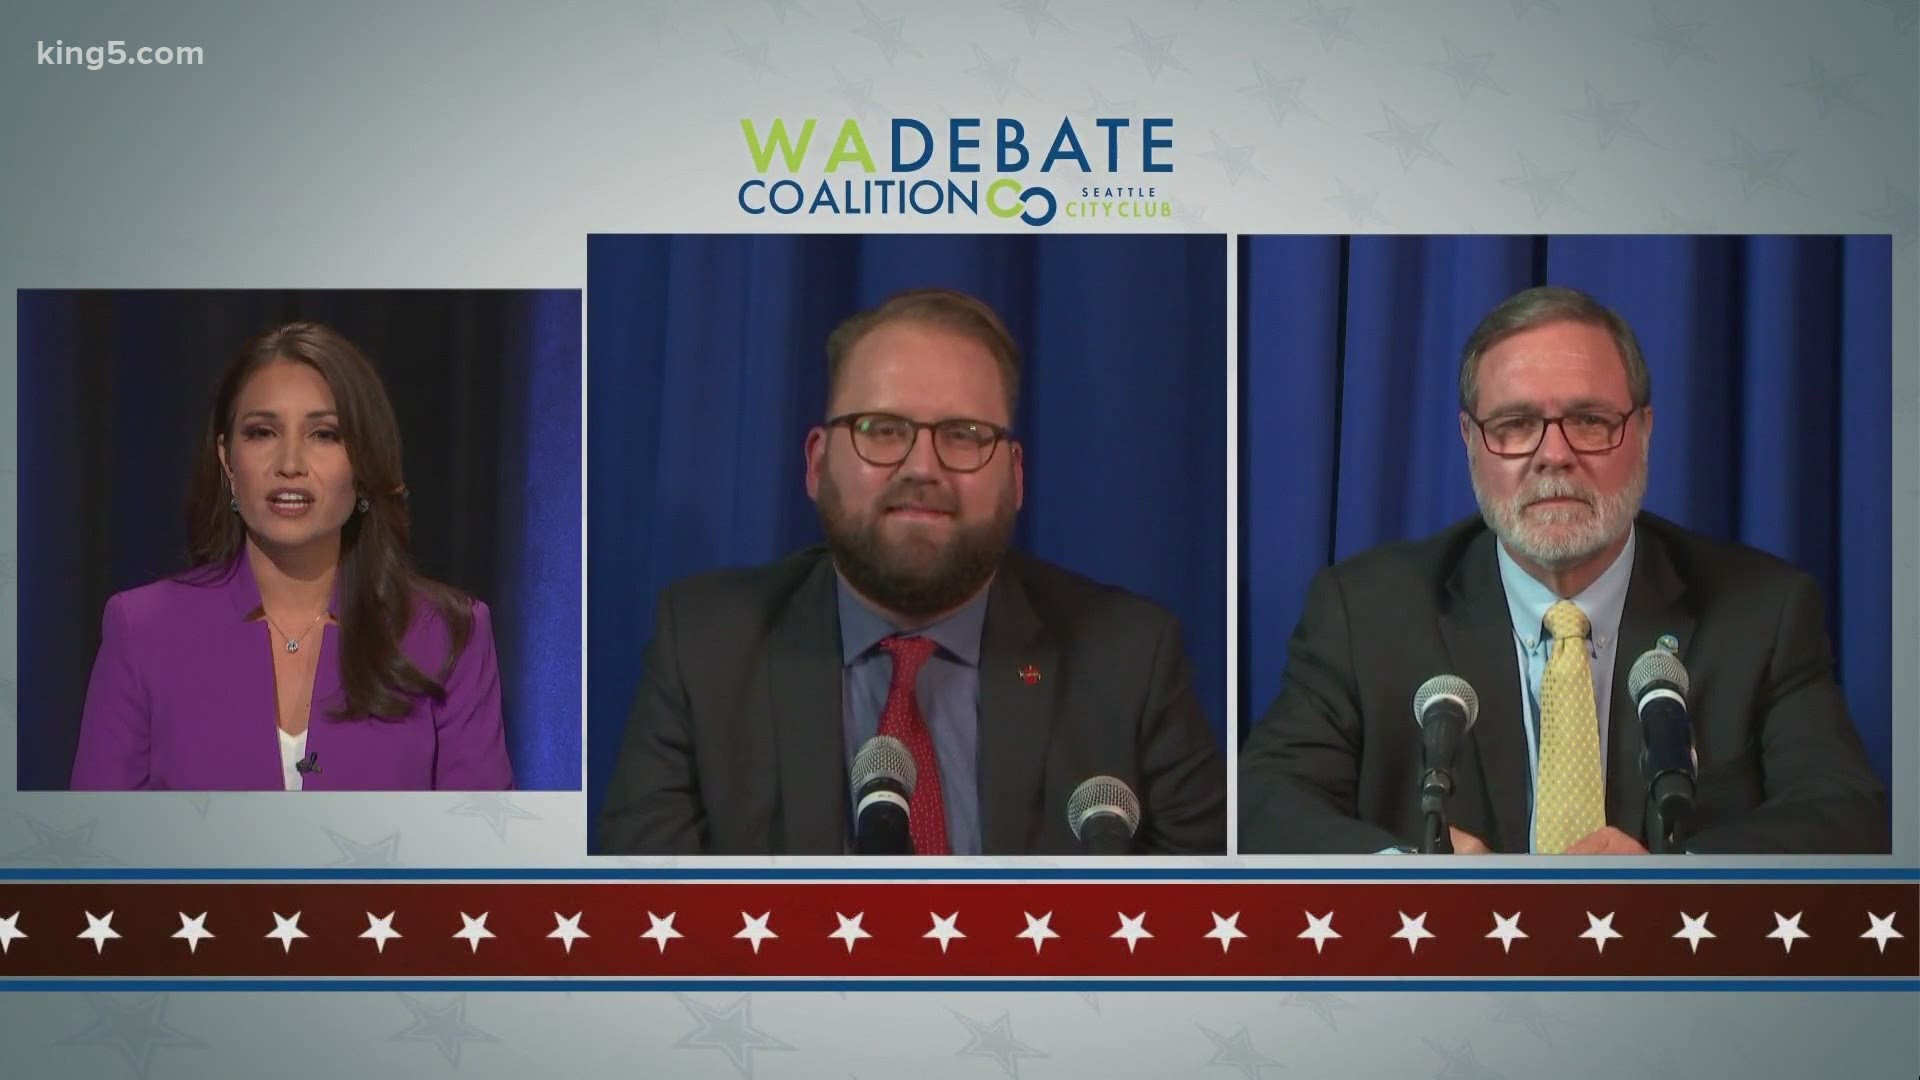 State Sen. Marko Liias and Congressman Denny Heck met in a televised debate Thursday as they vie for Washington's second highest office.